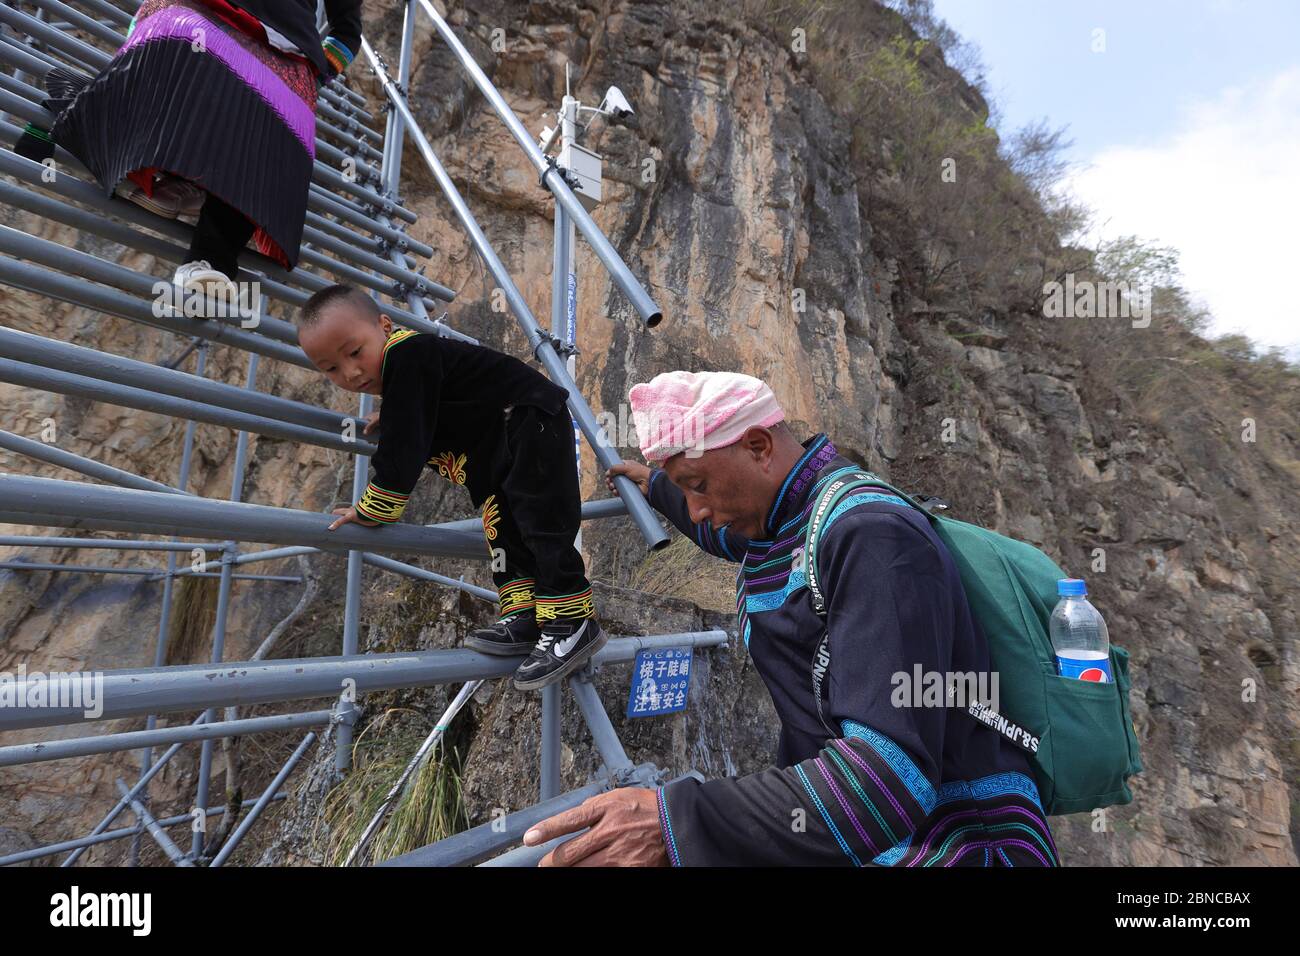 Zhaojue, China's Sichuan Province. 13th May, 2020. Mou'se Achang and his wife Ale Quzuo with their son go down the steel ladder to leave Atulieer village and move to their new home at a newly-built community for poverty alleviation relocation in Zhaojue County, southwest China's Sichuan Province, May 13, 2020. TO GO WITH:'China Focus: Relocated villagers leave poverty on clifftop' Credit: Jiang Hongjing/Xinhua/Alamy Live News Stock Photo